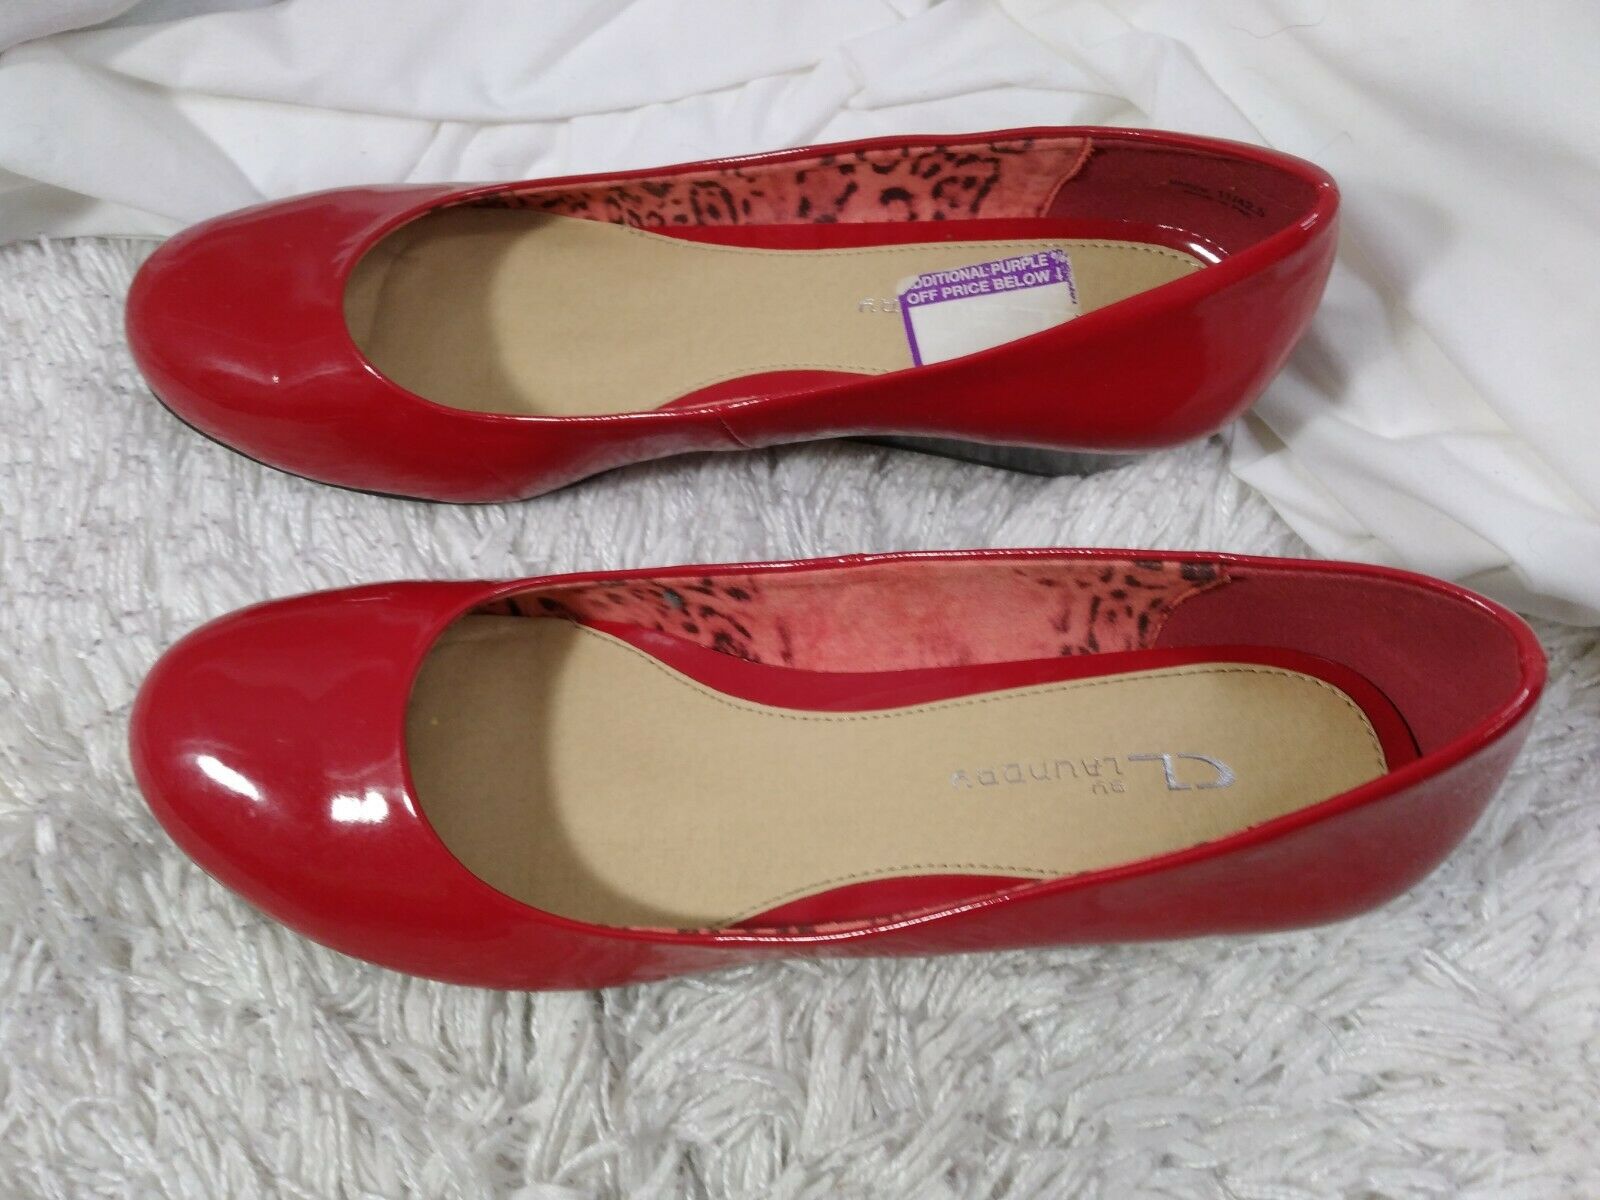 Red casual or dress shoes (New) Size 11. Versatile for work or parties